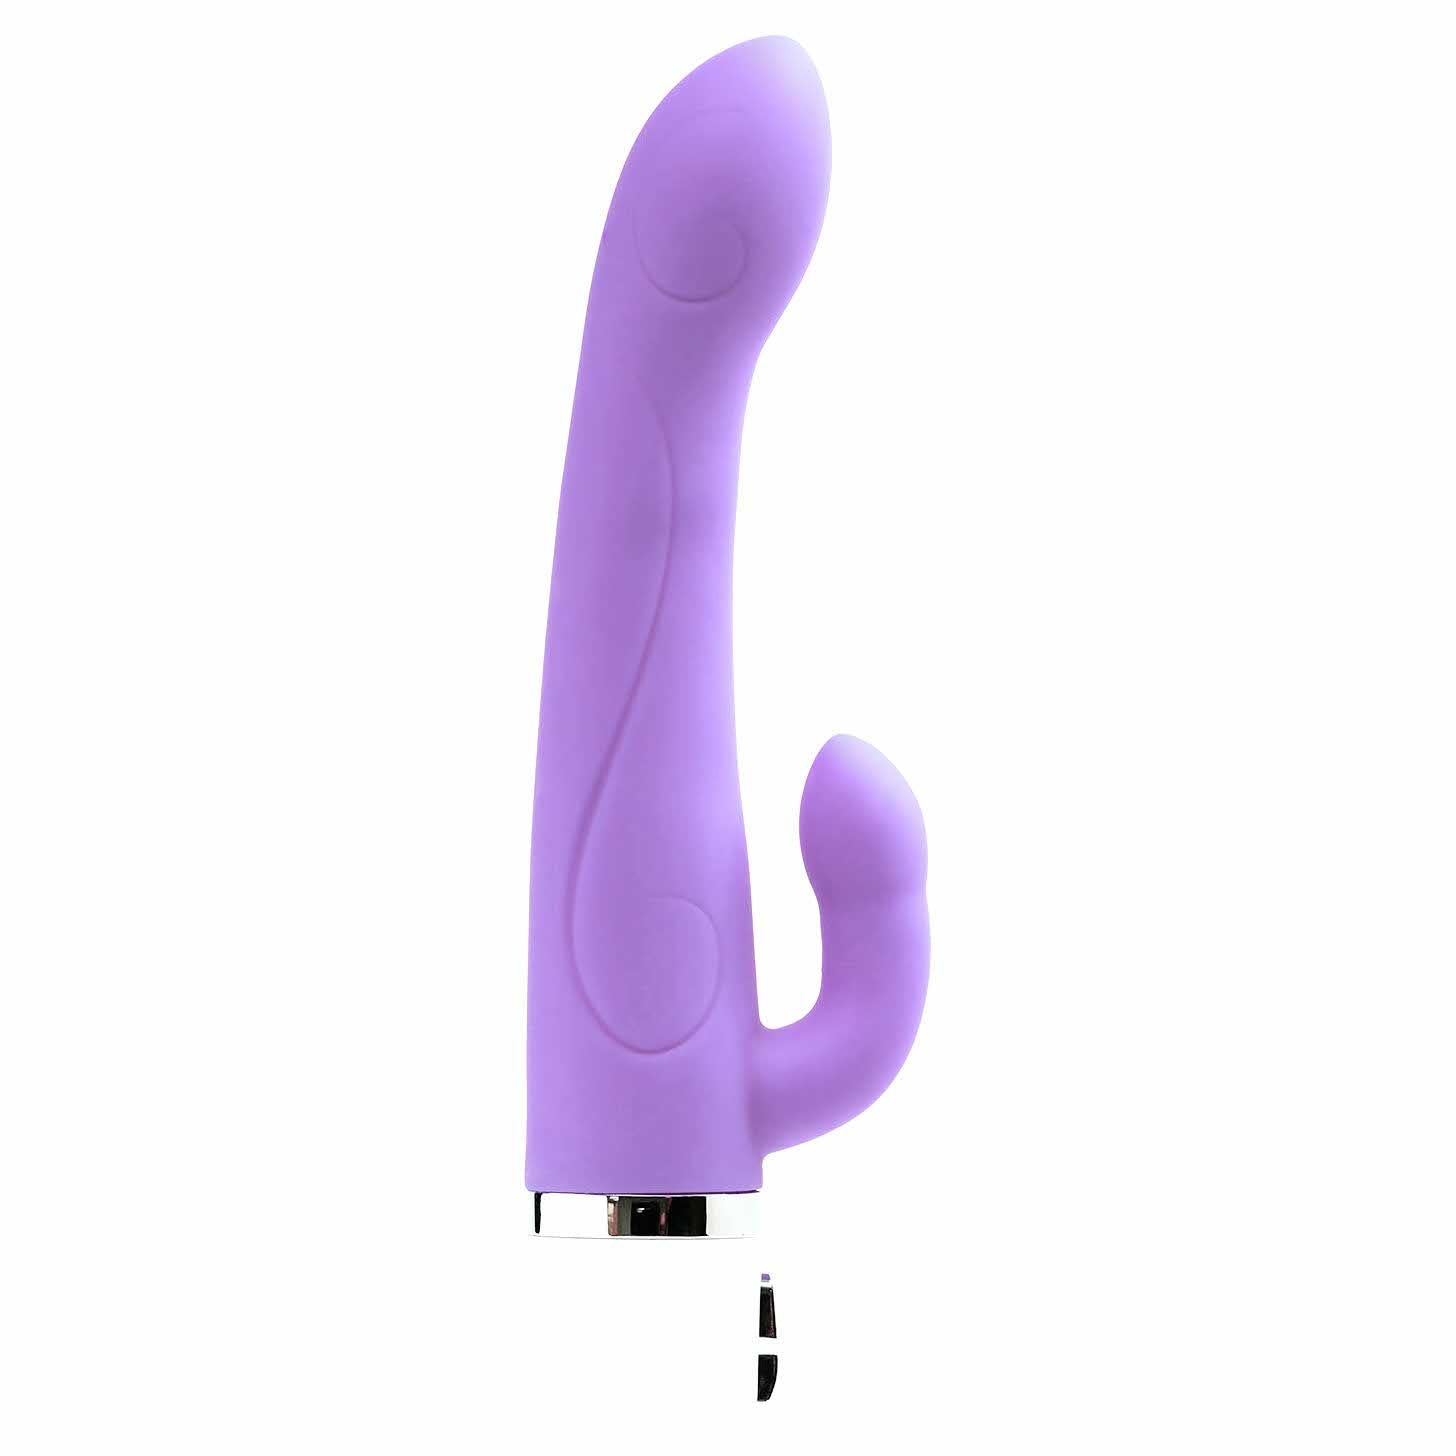 side view of the vedo wink silicone 8.46" rabbit vibrator vibe savvi-p0205 orgasmic orchid